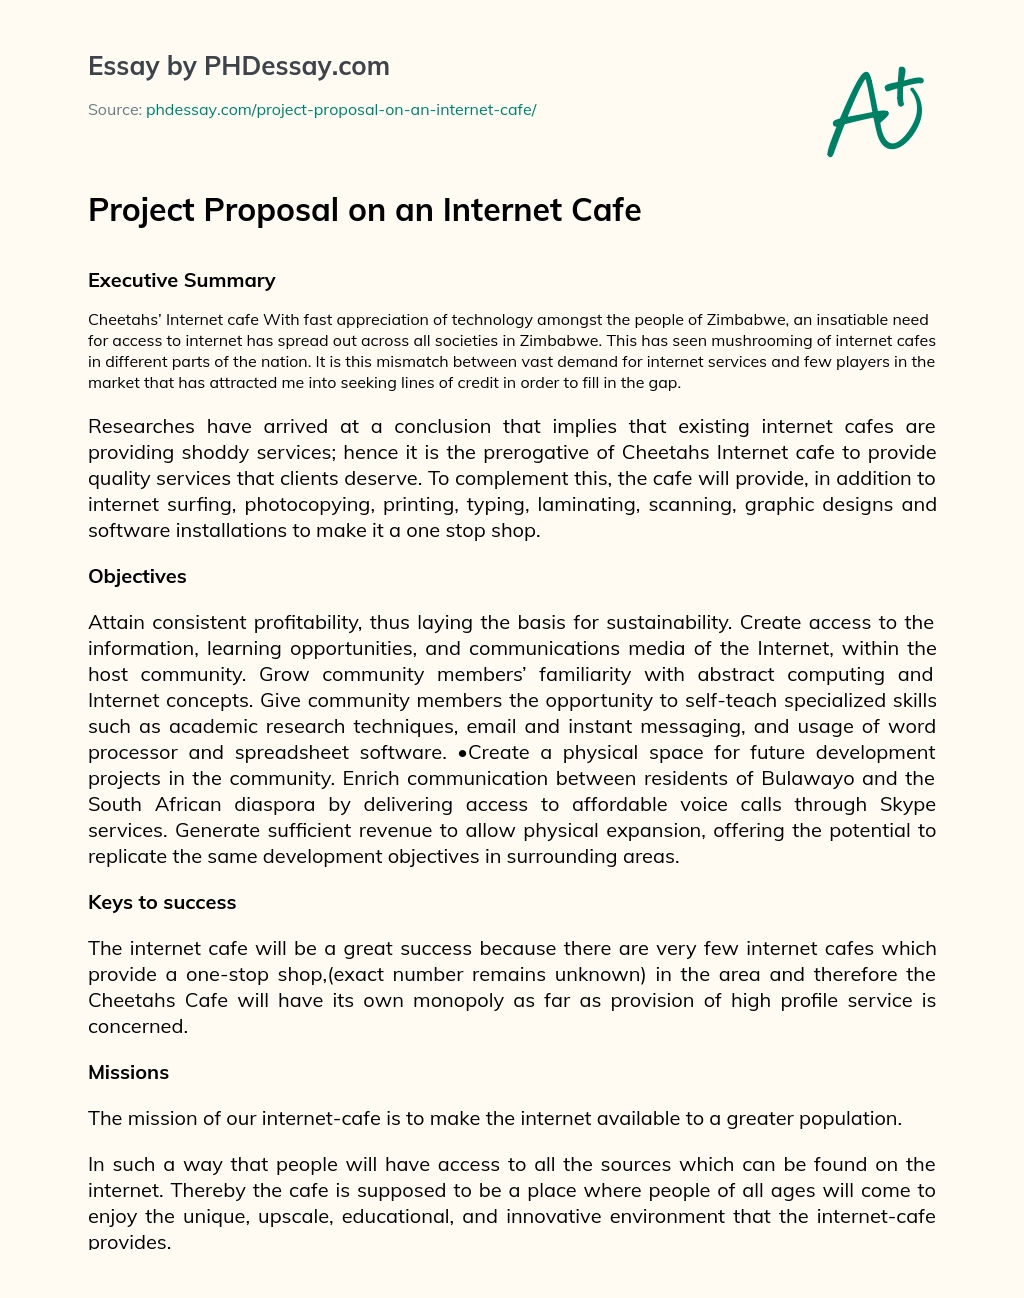 Project Proposal on an Internet Cafe essay